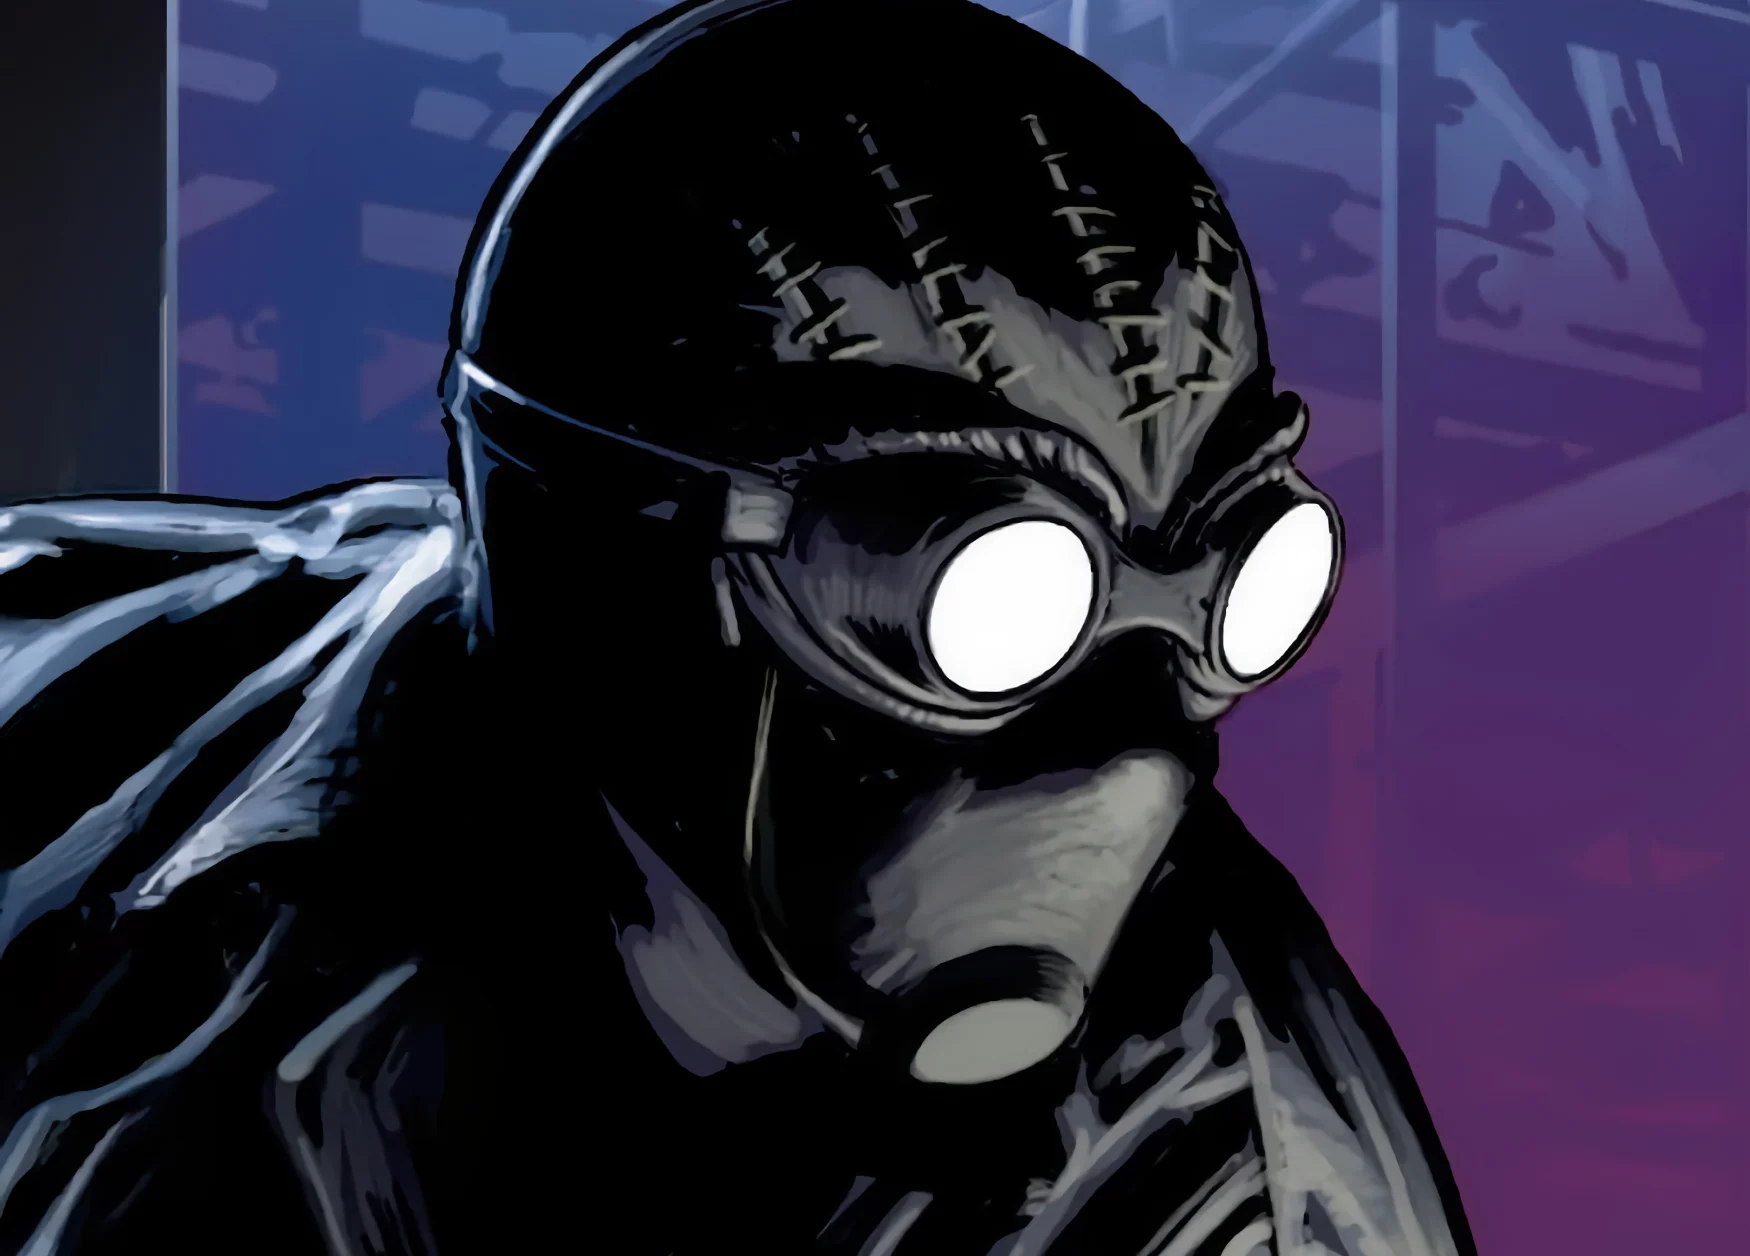 Shadowy closeup comic art of the character Spider-Man Noir with a purple background